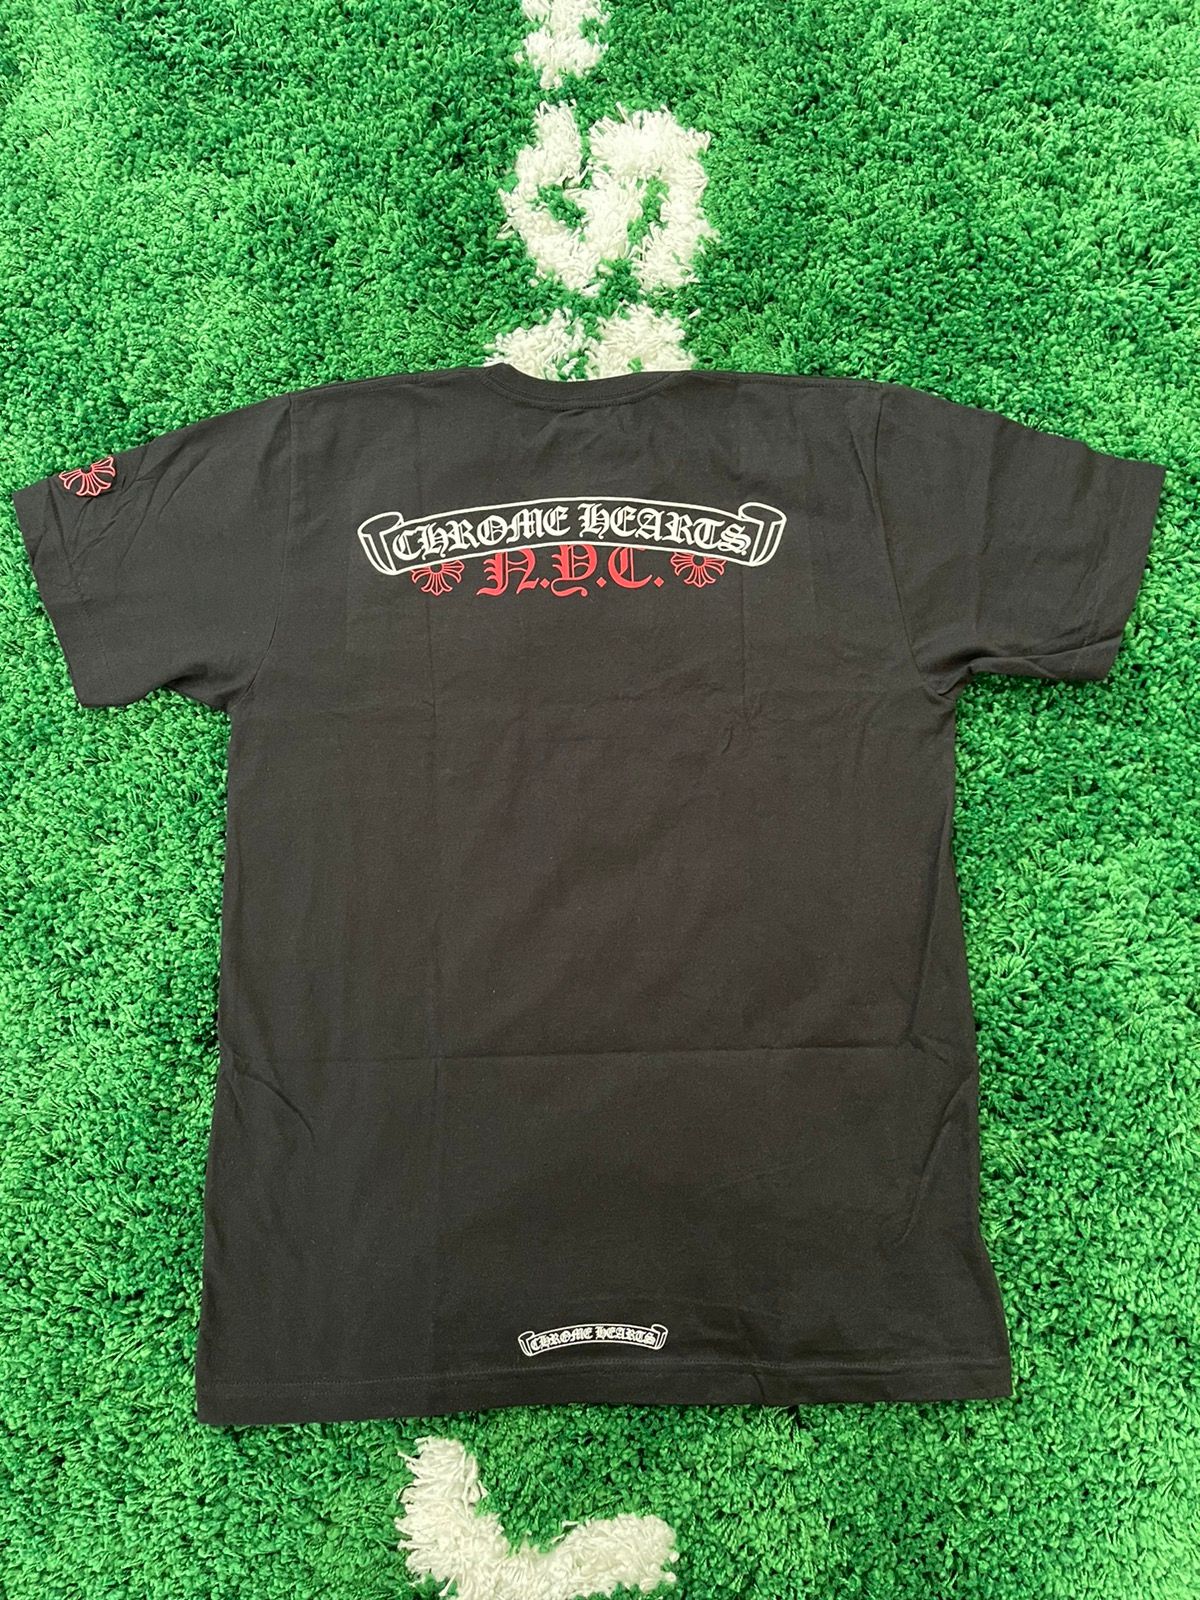 Chrome Hearts Chrome Hearts Scroll Logo NYC exclusive Tee Size US S / EU 44-46 / 1 - 1 Preview